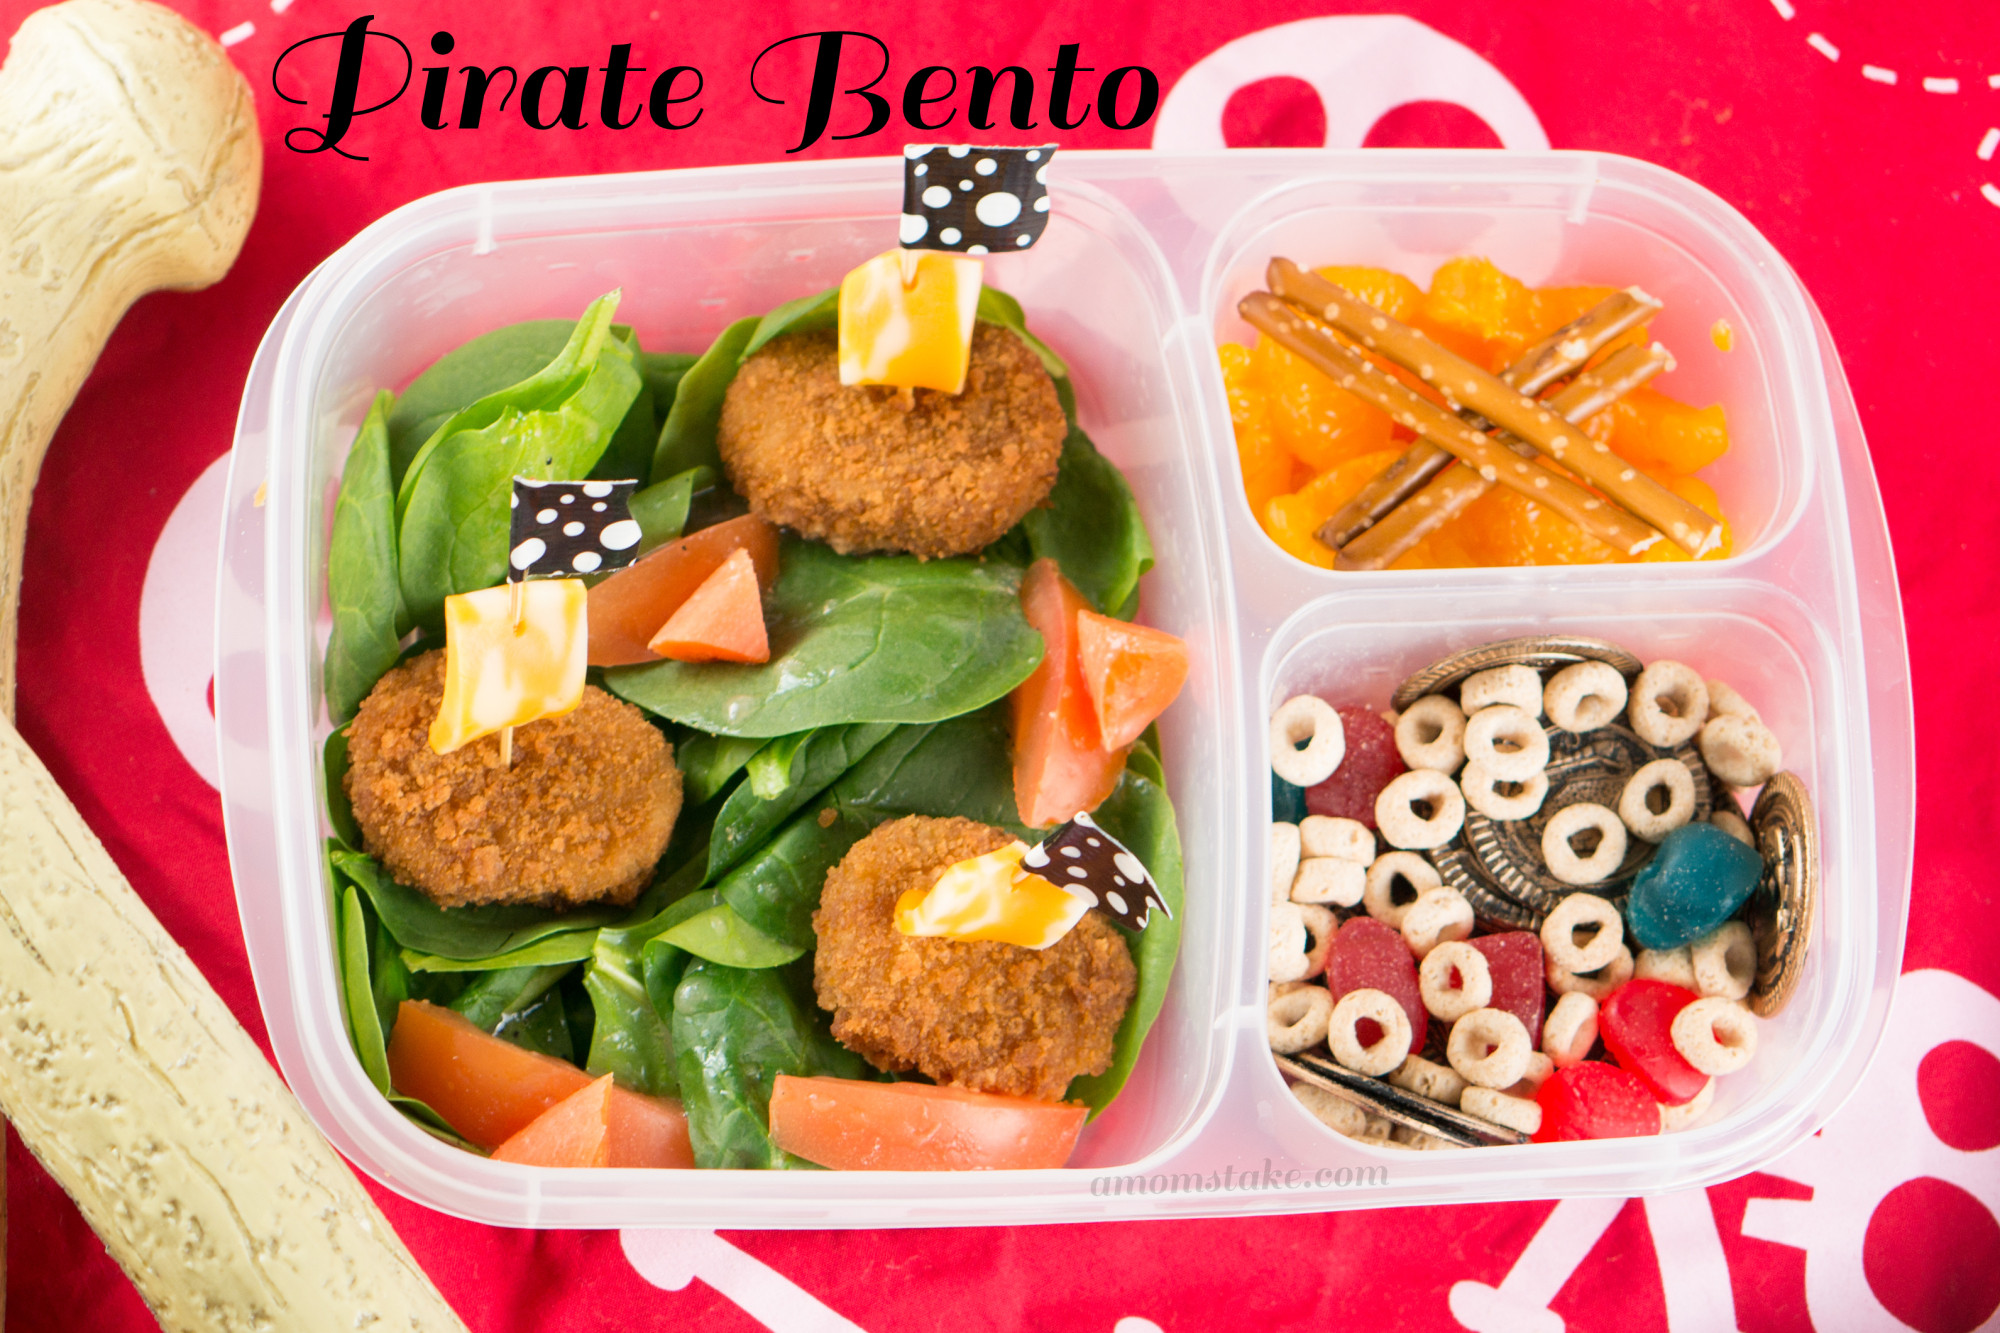 Bento Box Recipes For Kids
 Get ready for Back to School with this Bento Box Recipes